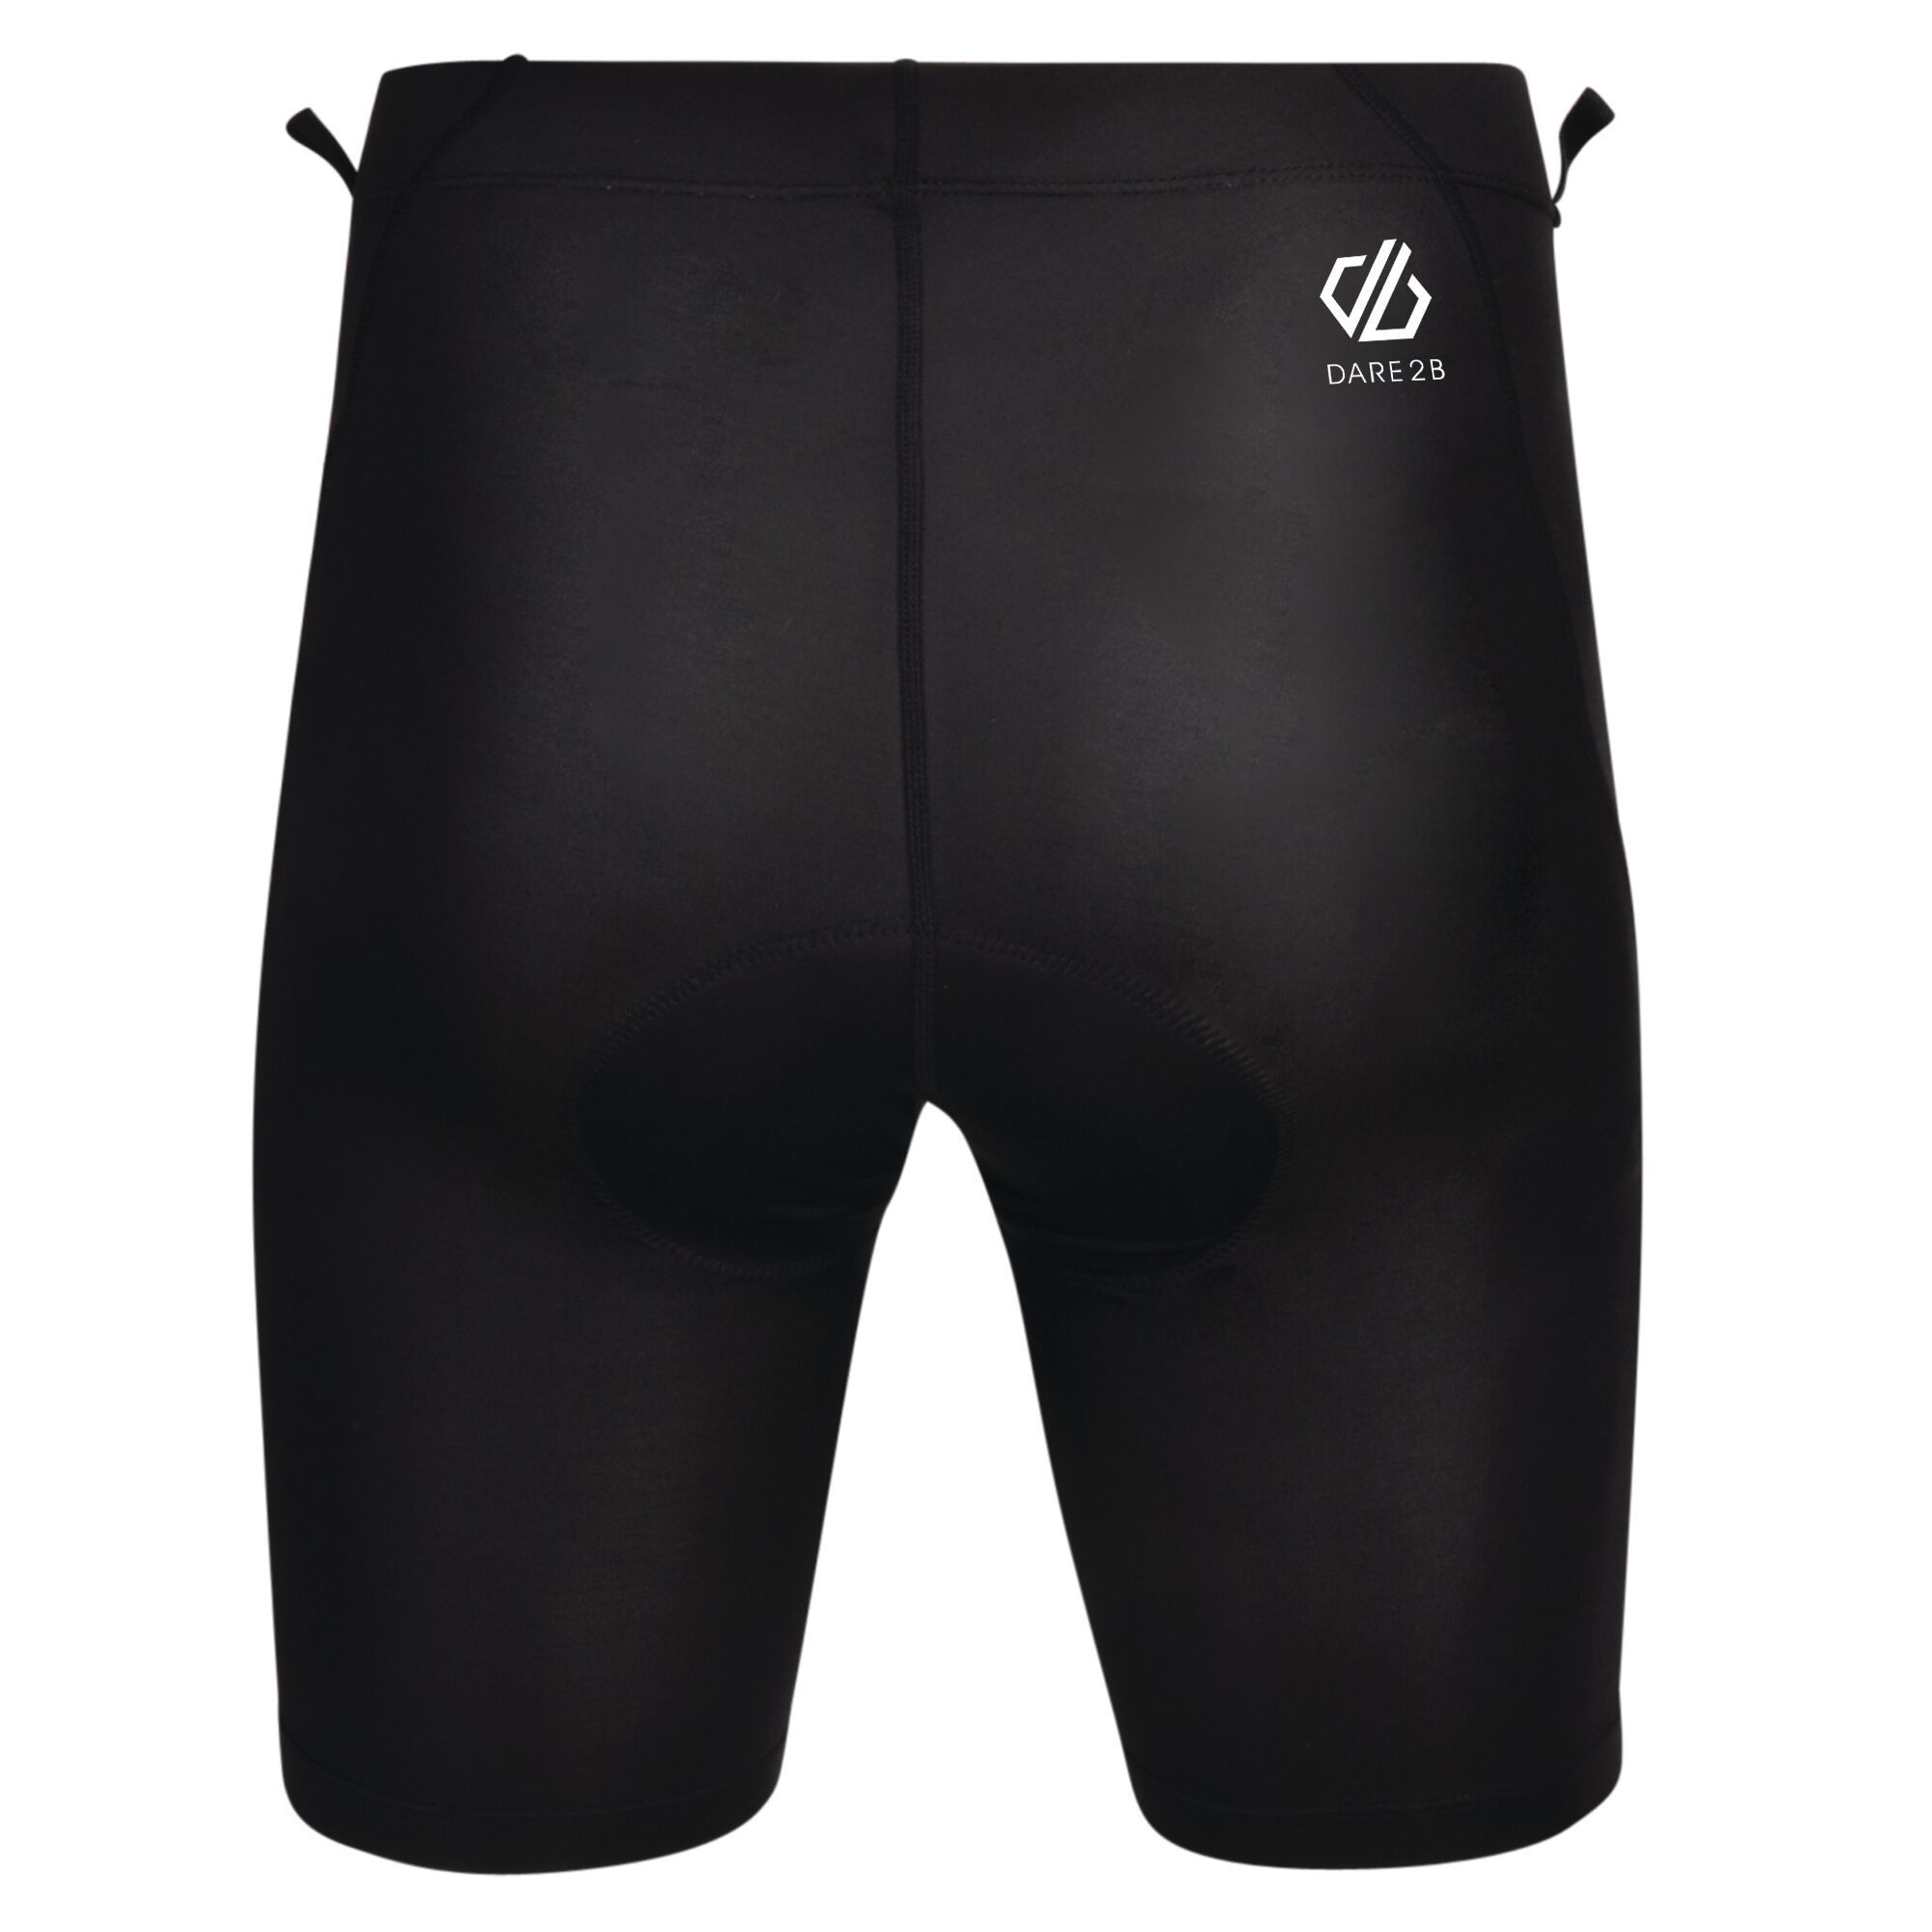 Material: elastane: 12%, polyester: 88%. Q-Wic lightweight polyester/elastane fabric. Quick drying. Flat locked seams for comfort. Interactive attachment loop at waistband. 2D moulded stretch multi density foam insert. Coolmax moisture control and  treatment to insert. Reflective detail for enhanced visibility.